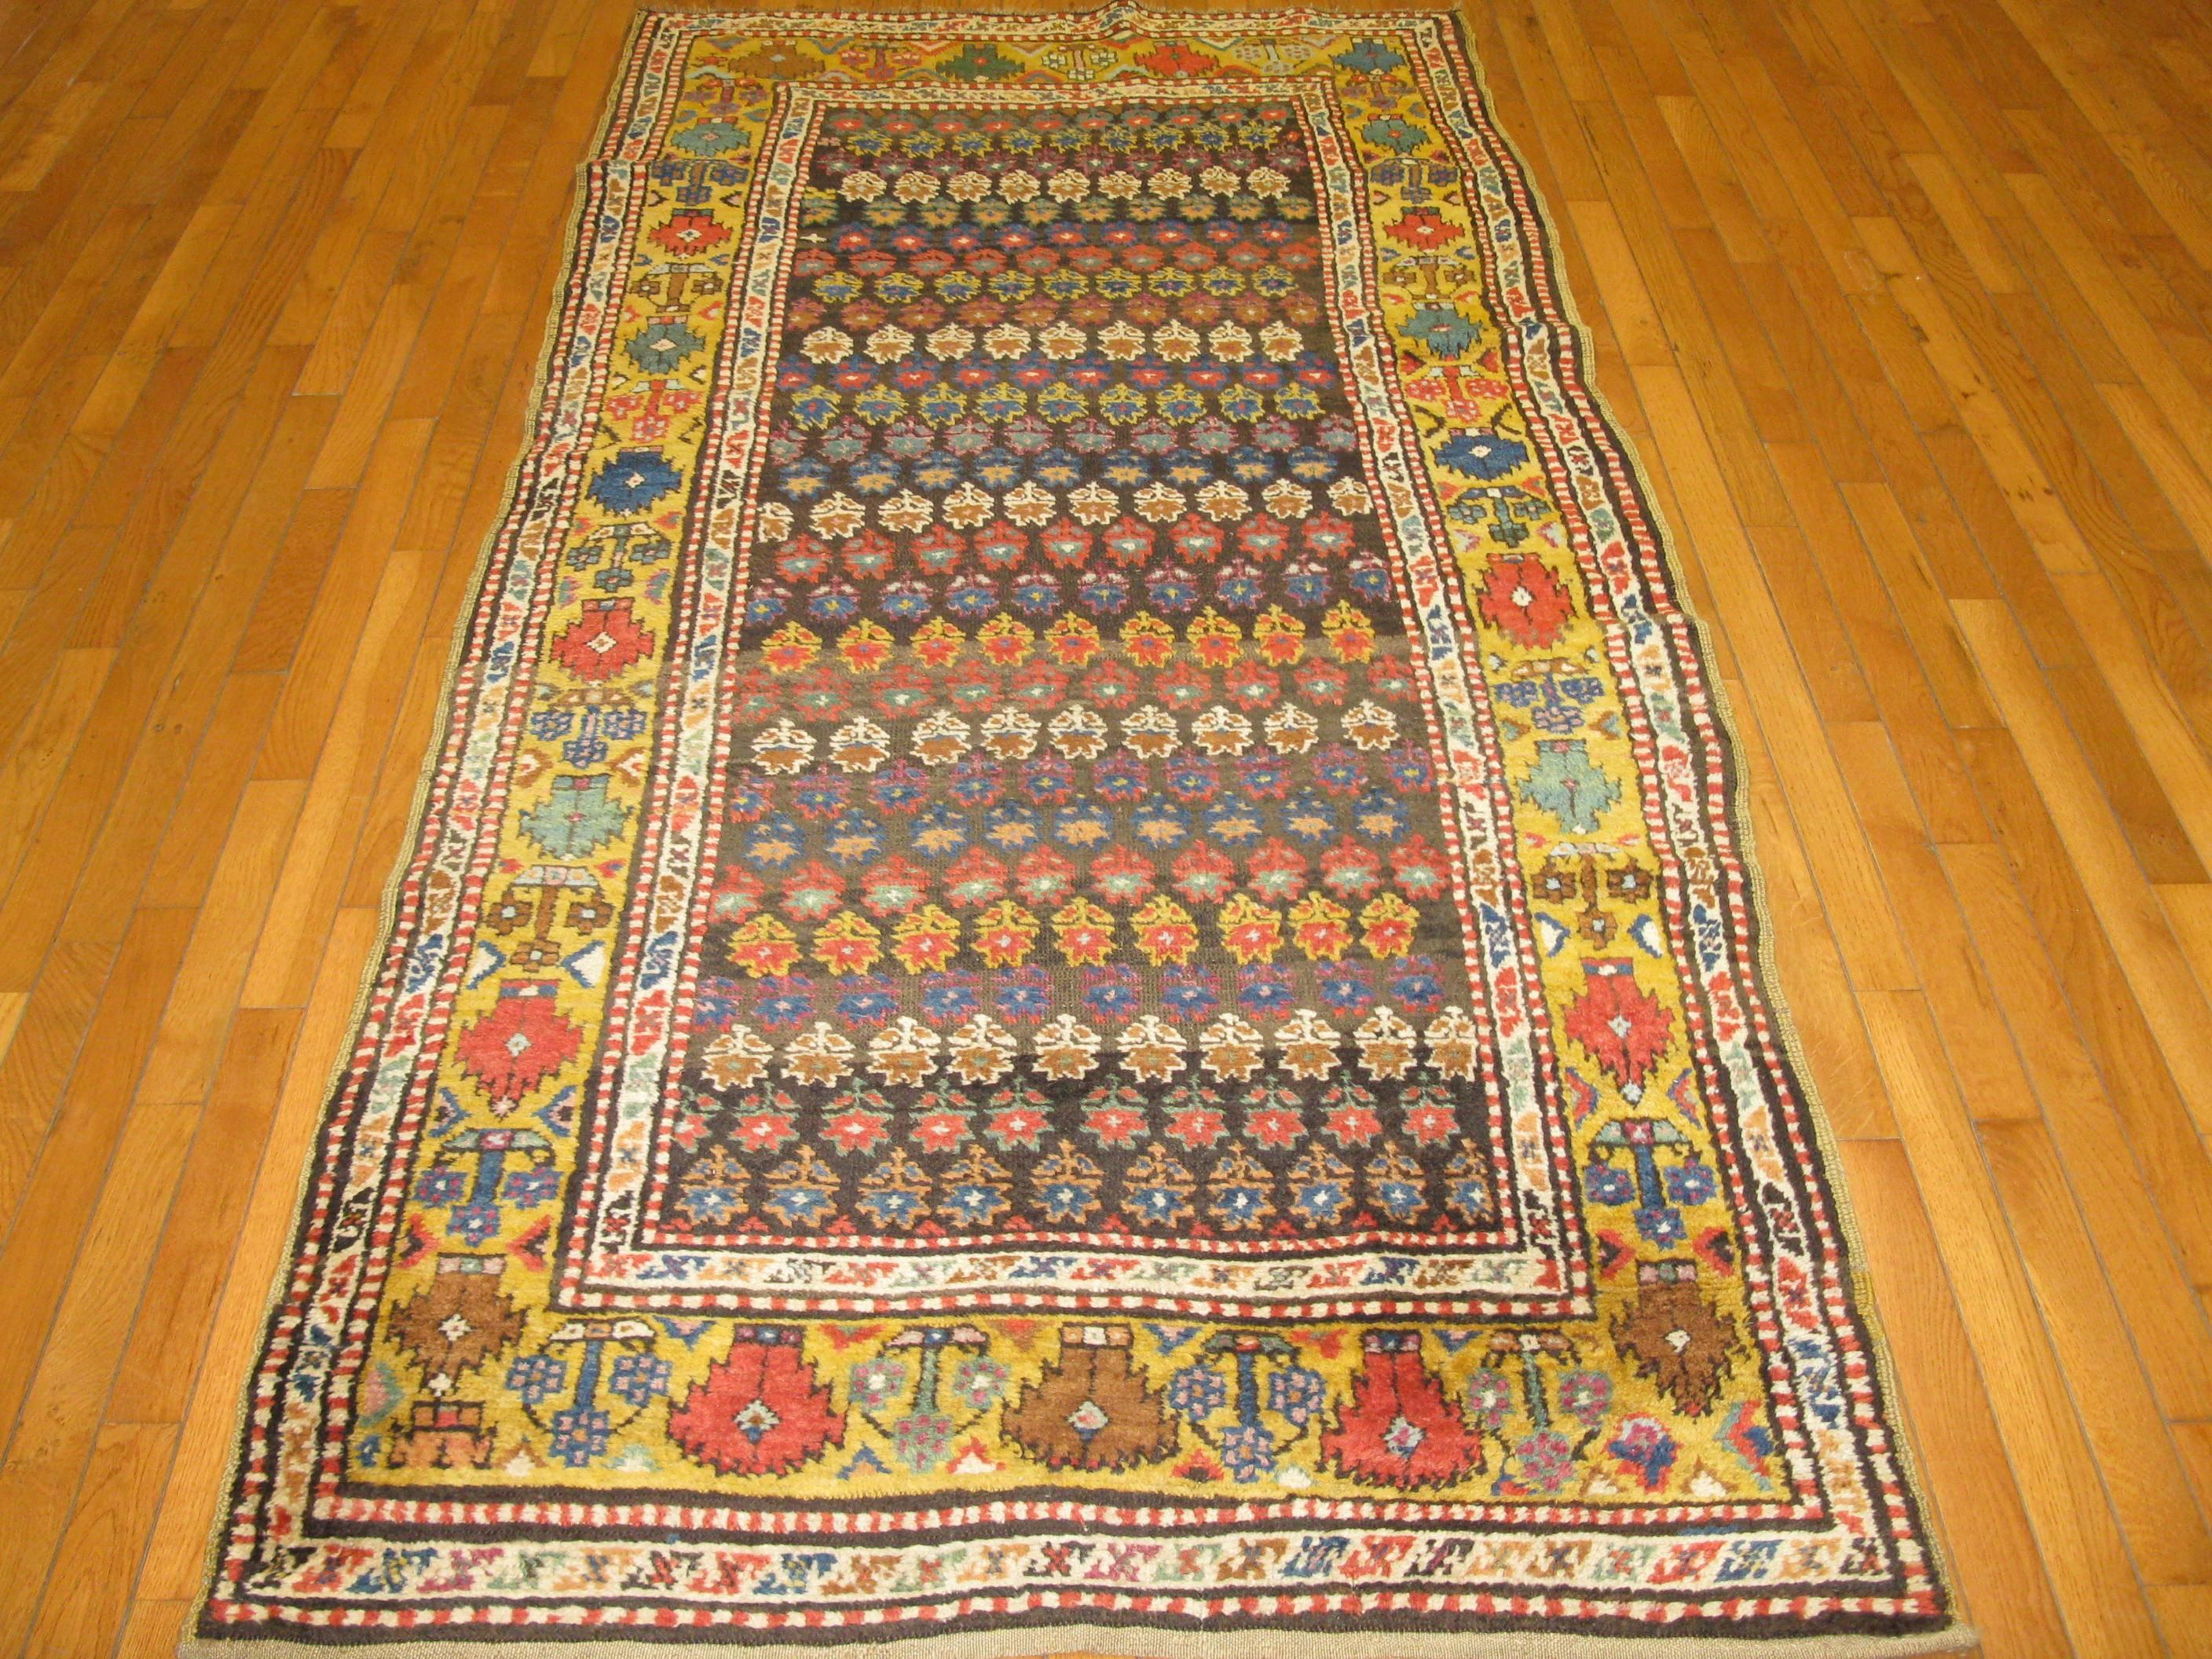 Beautiful and rare short runner antique Kazak rug. It has an all-over pattern hand-knotted in rich multiple colors. The rug measures 3' 8'' x 7' 8'', it is in great shape and made with all wool and natural dyes.